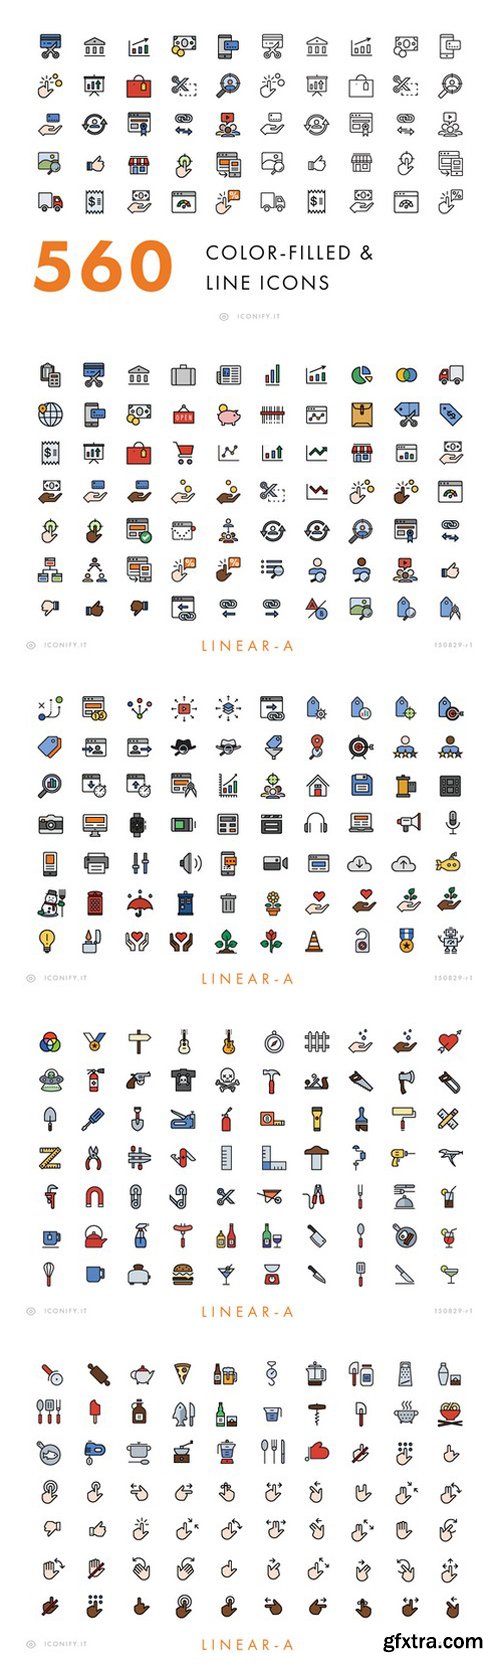 560 Line Filled Line Icons